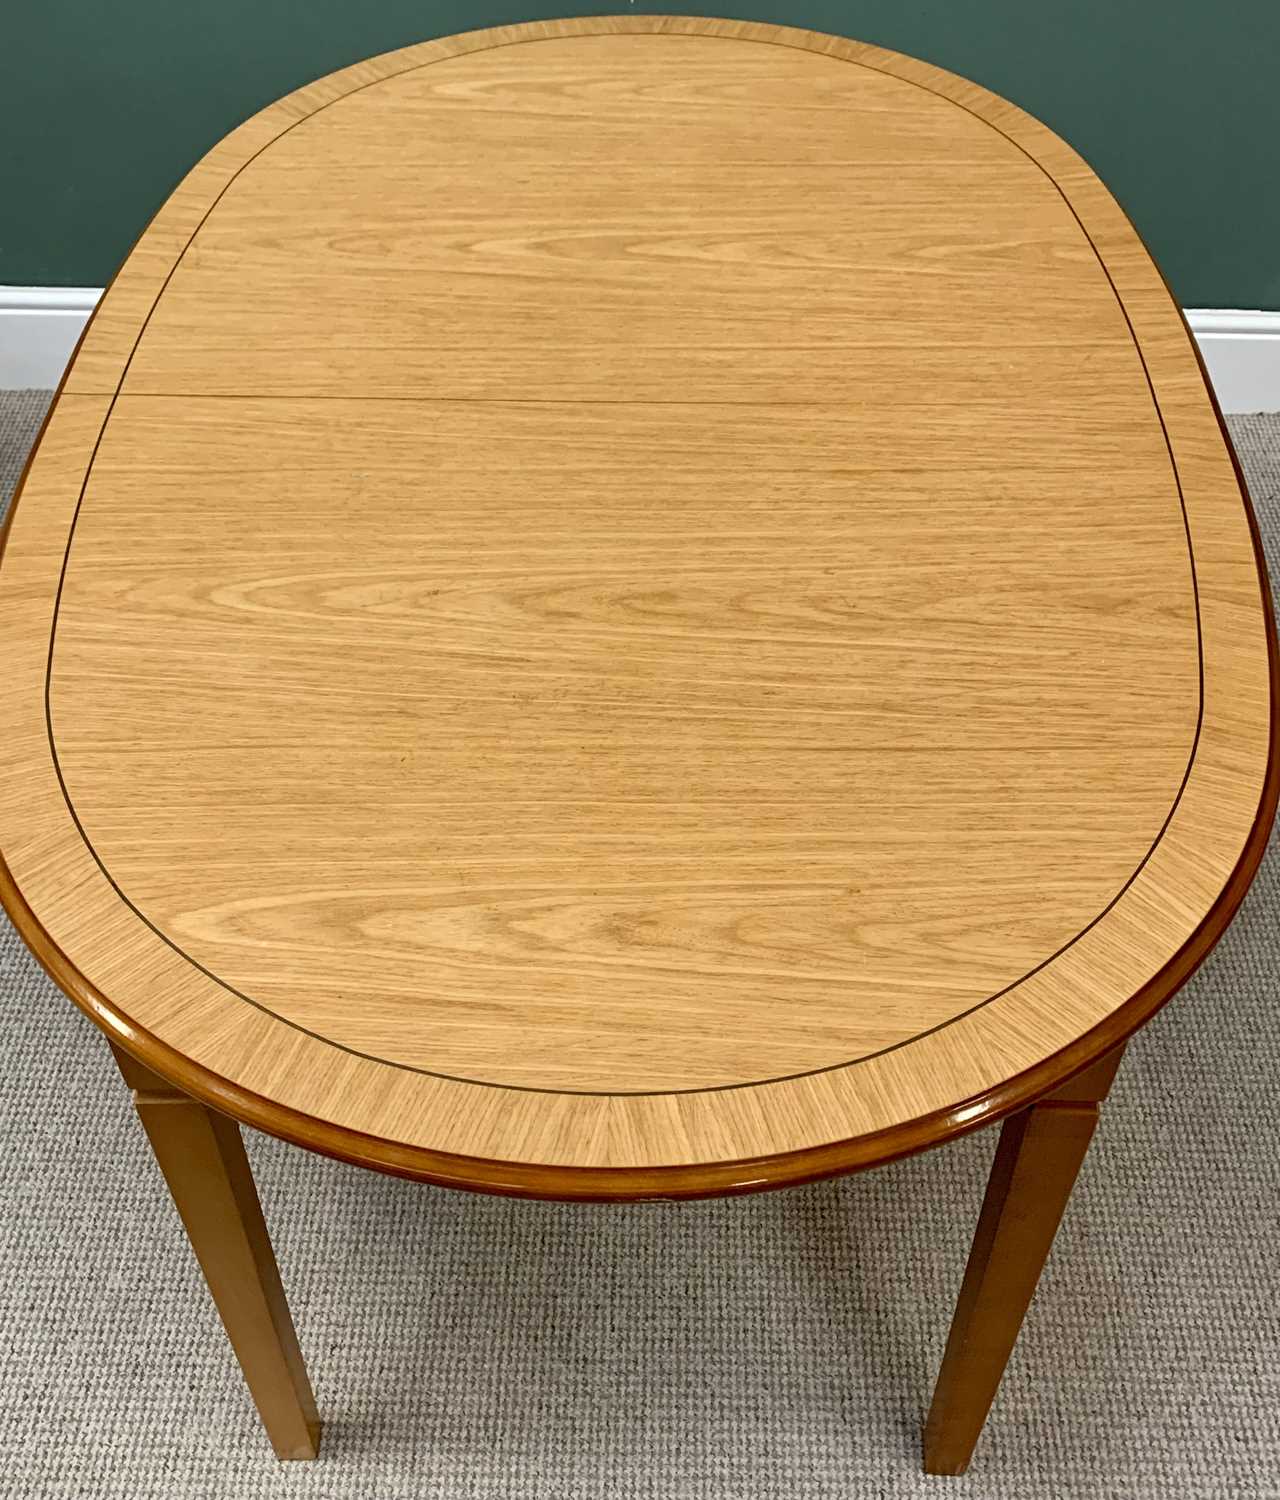 MODERN LIGHT WOOD EXTENDING DINING TABLE, 74cms H, 95cms W, 183cms D and a SET OF SIX SLATTED - Image 2 of 6